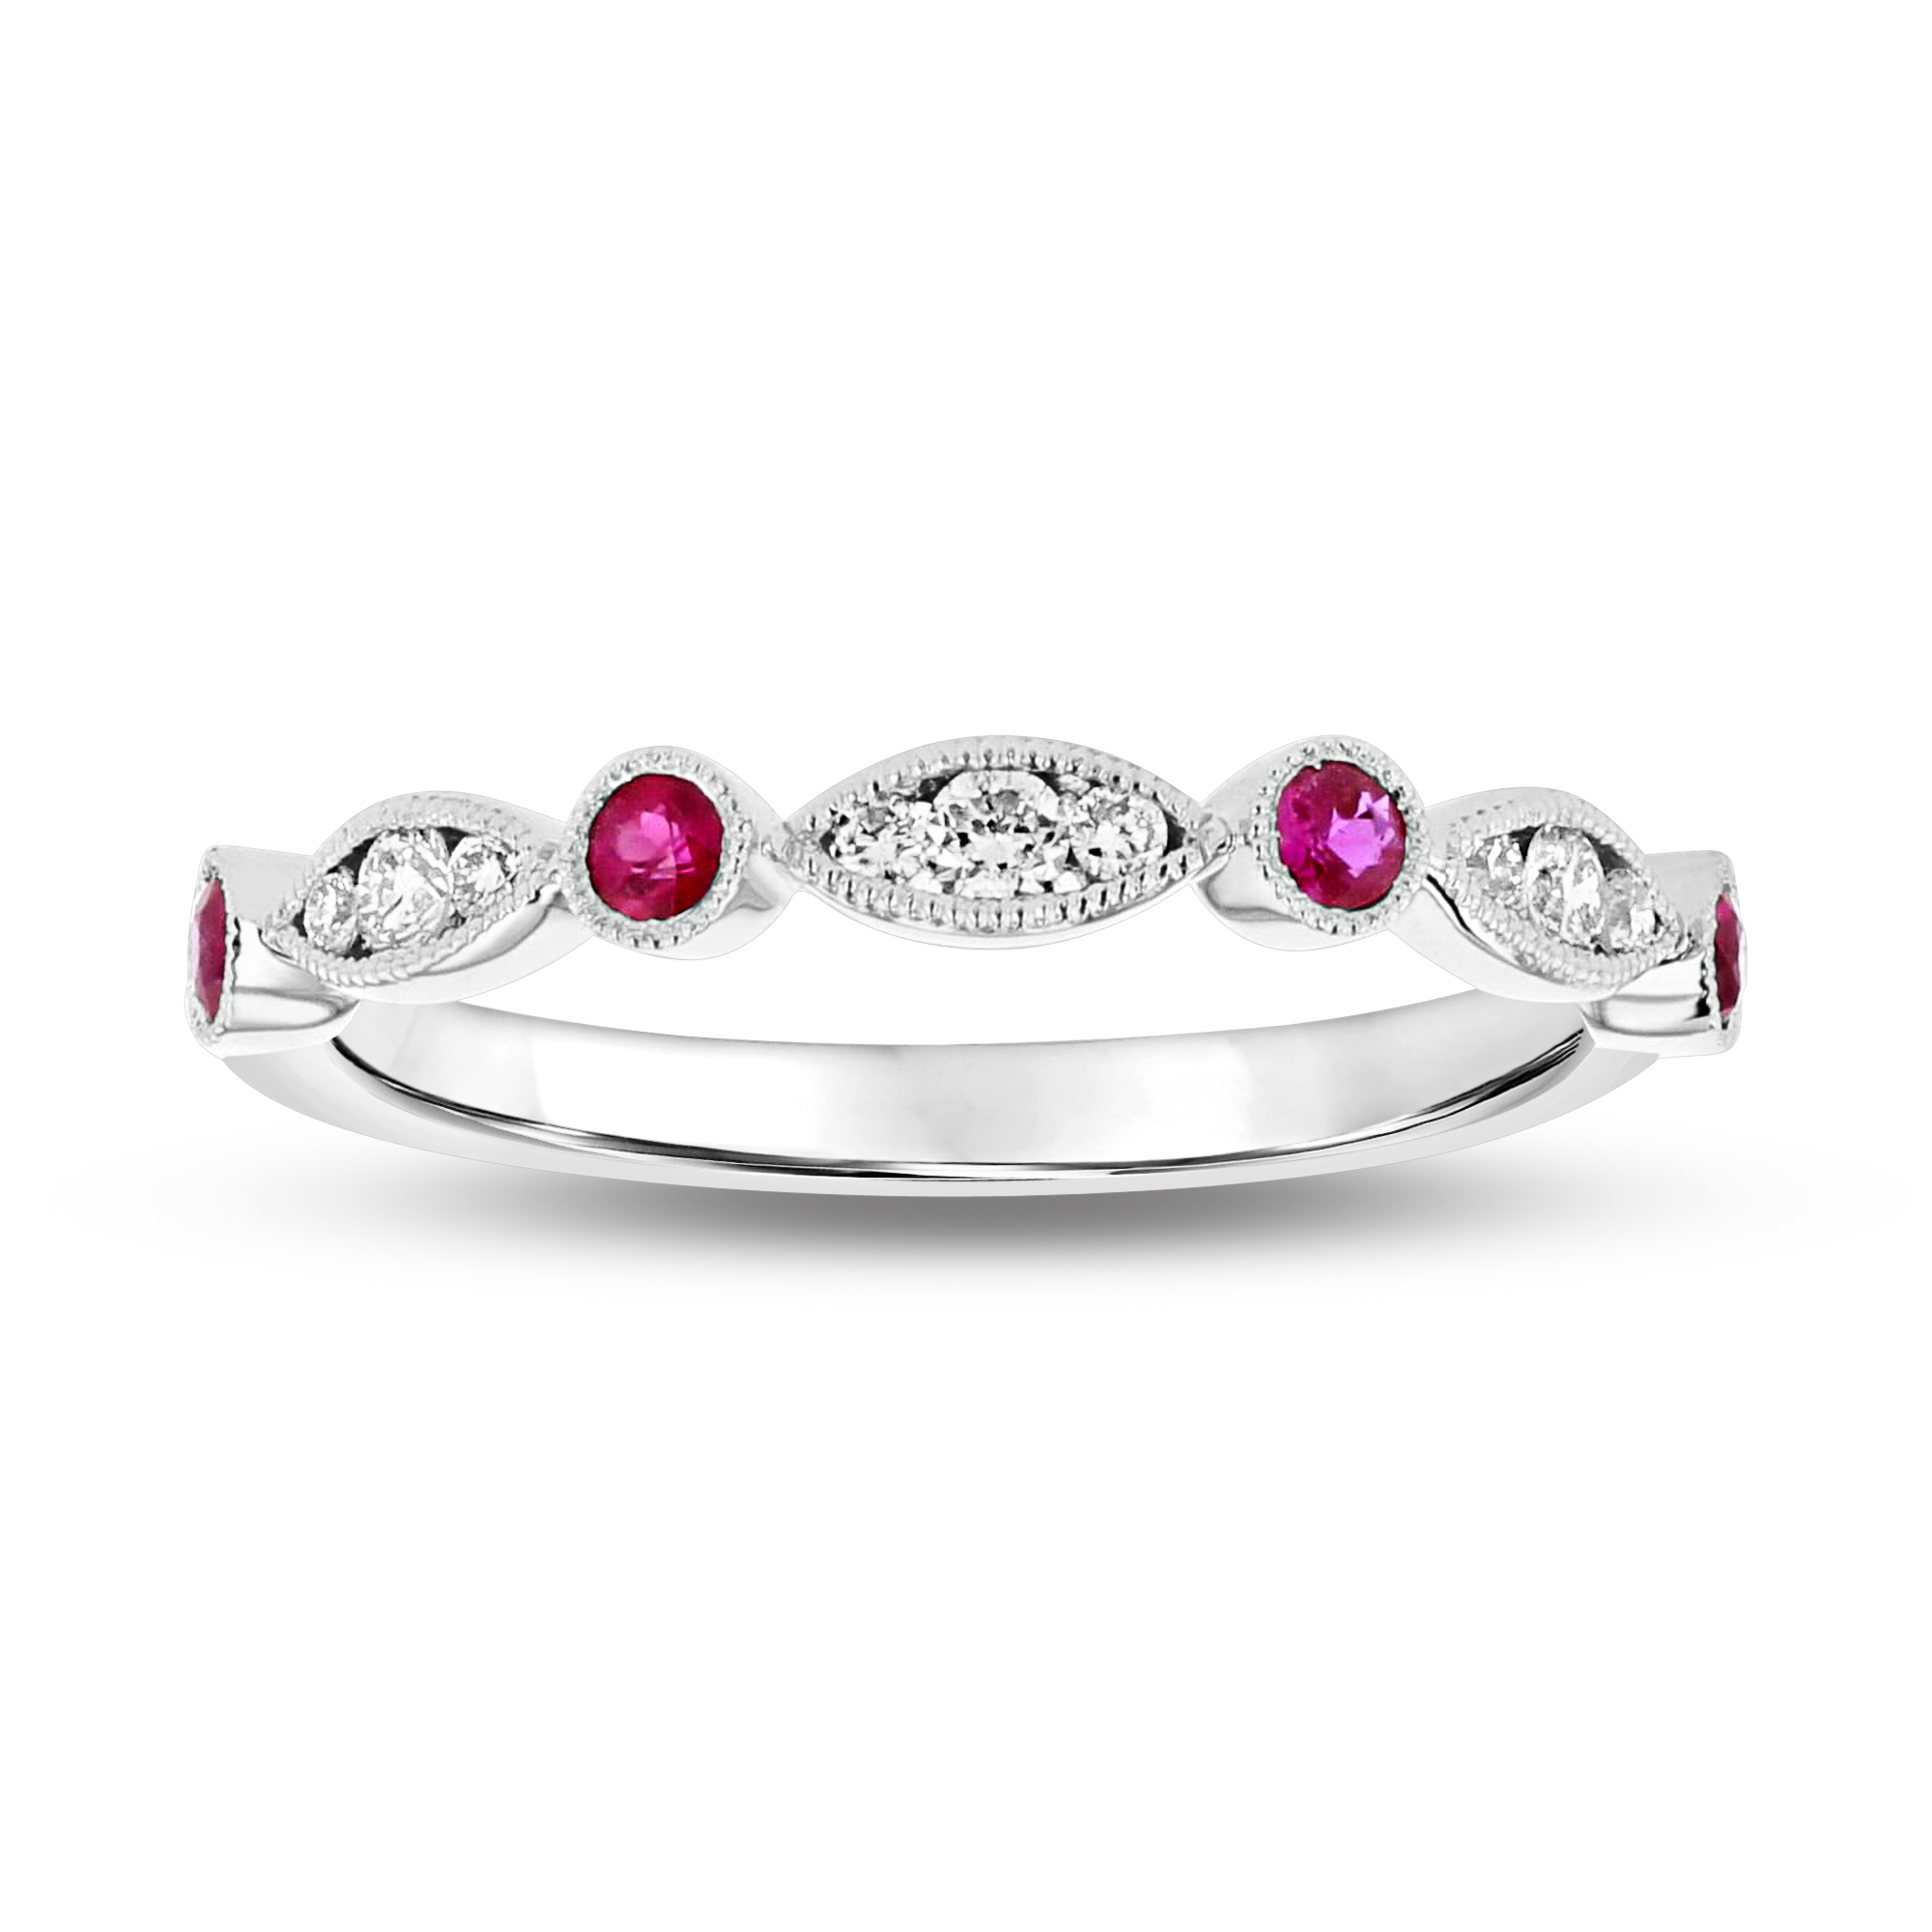 View 0.35ctw Diamond and Ruby Band in 18k White Gold